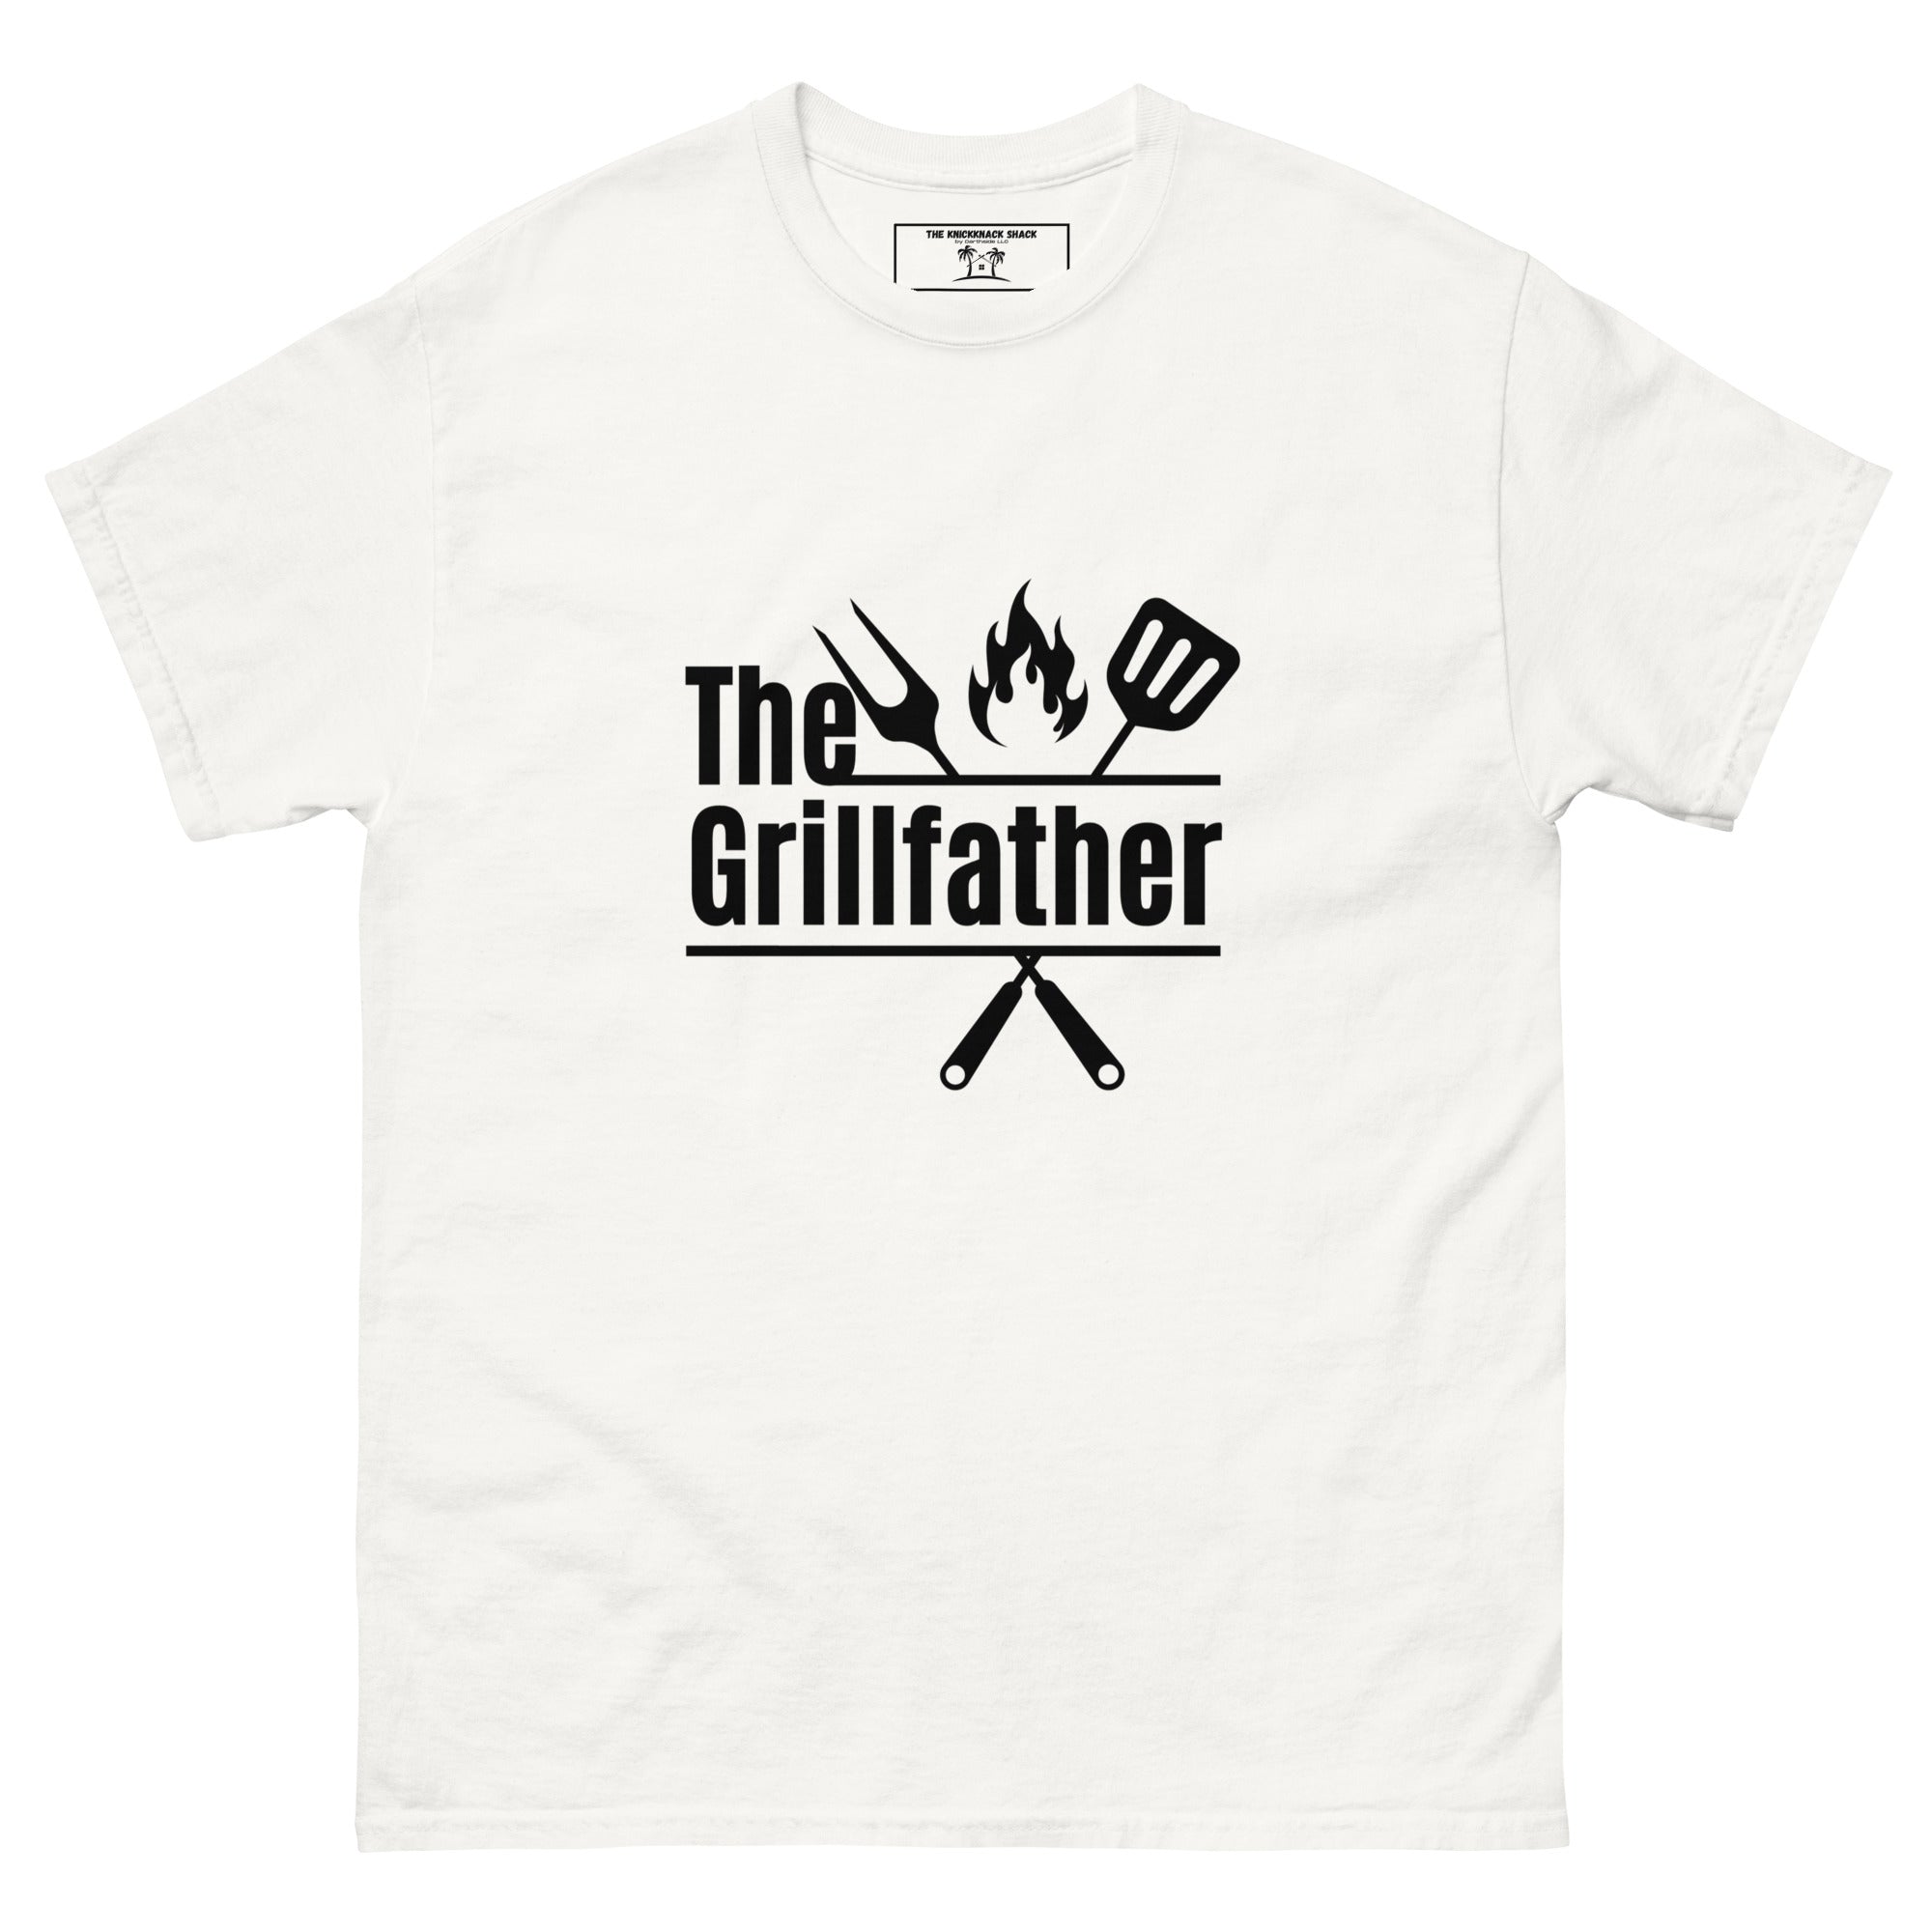 Classic Tee - The Grillfather (Light Colors)